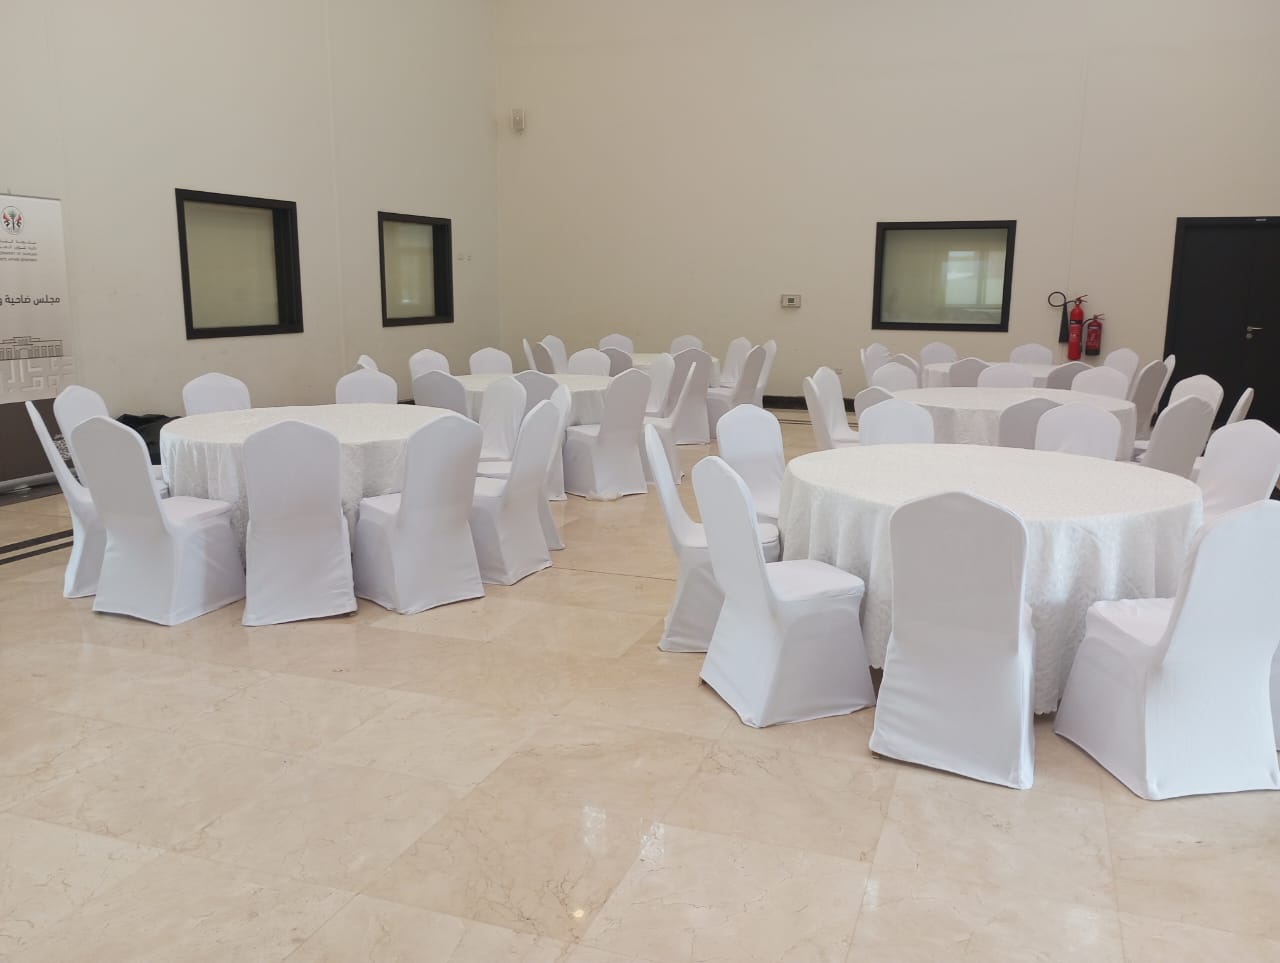 Chairs and Tables Rental in Mirdif 0505055969